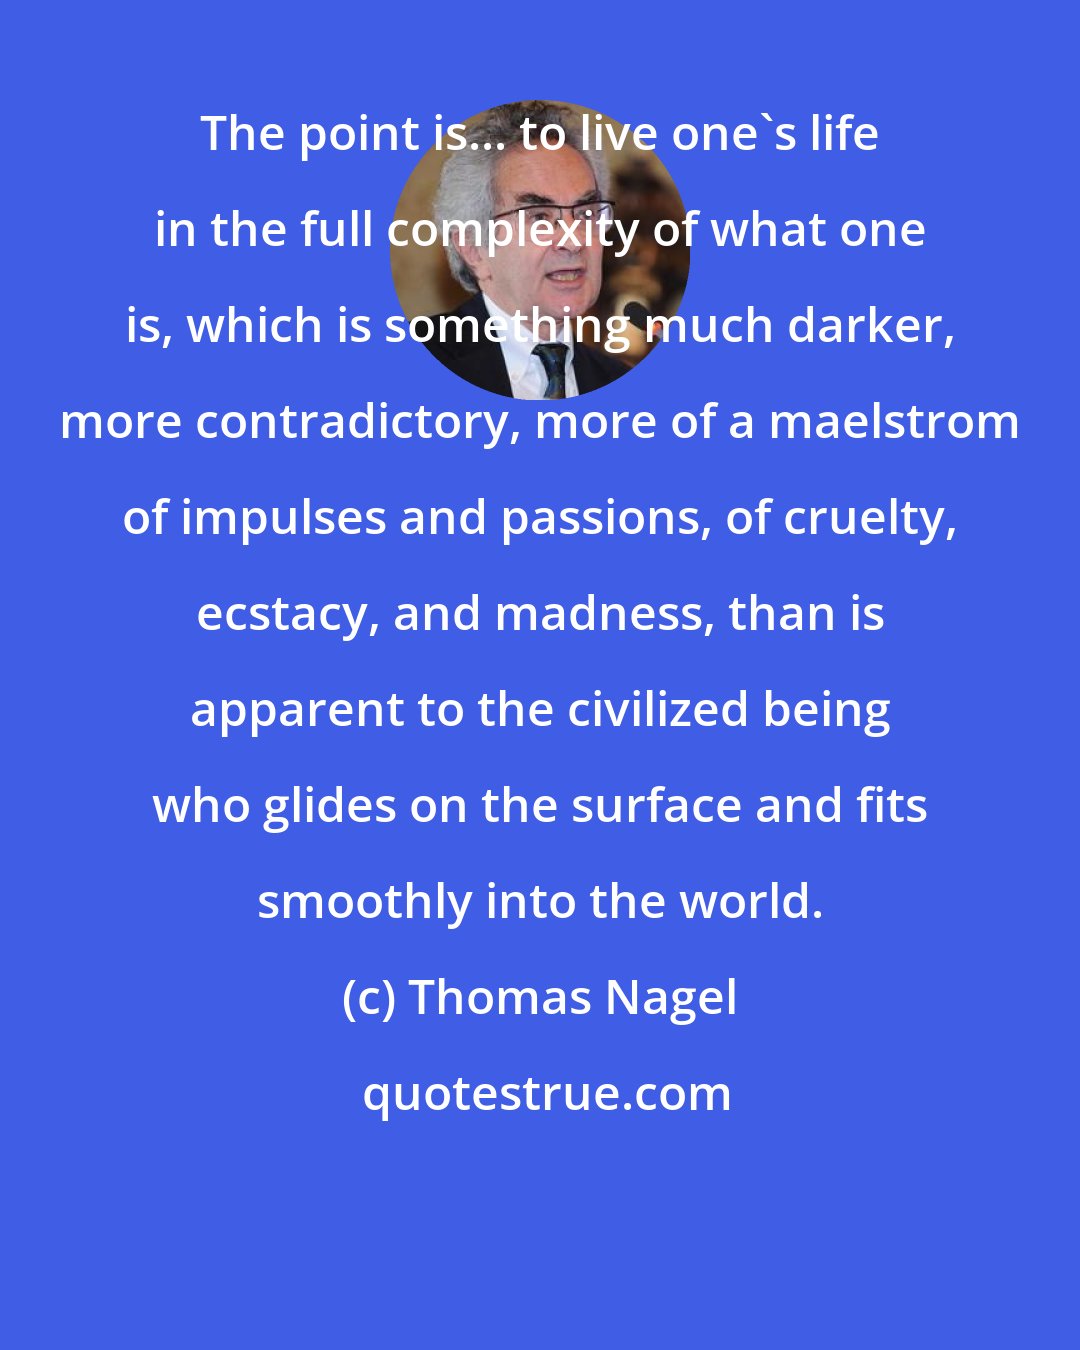 Thomas Nagel: The point is... to live one's life in the full complexity of what one is, which is something much darker, more contradictory, more of a maelstrom of impulses and passions, of cruelty, ecstacy, and madness, than is apparent to the civilized being who glides on the surface and fits smoothly into the world.